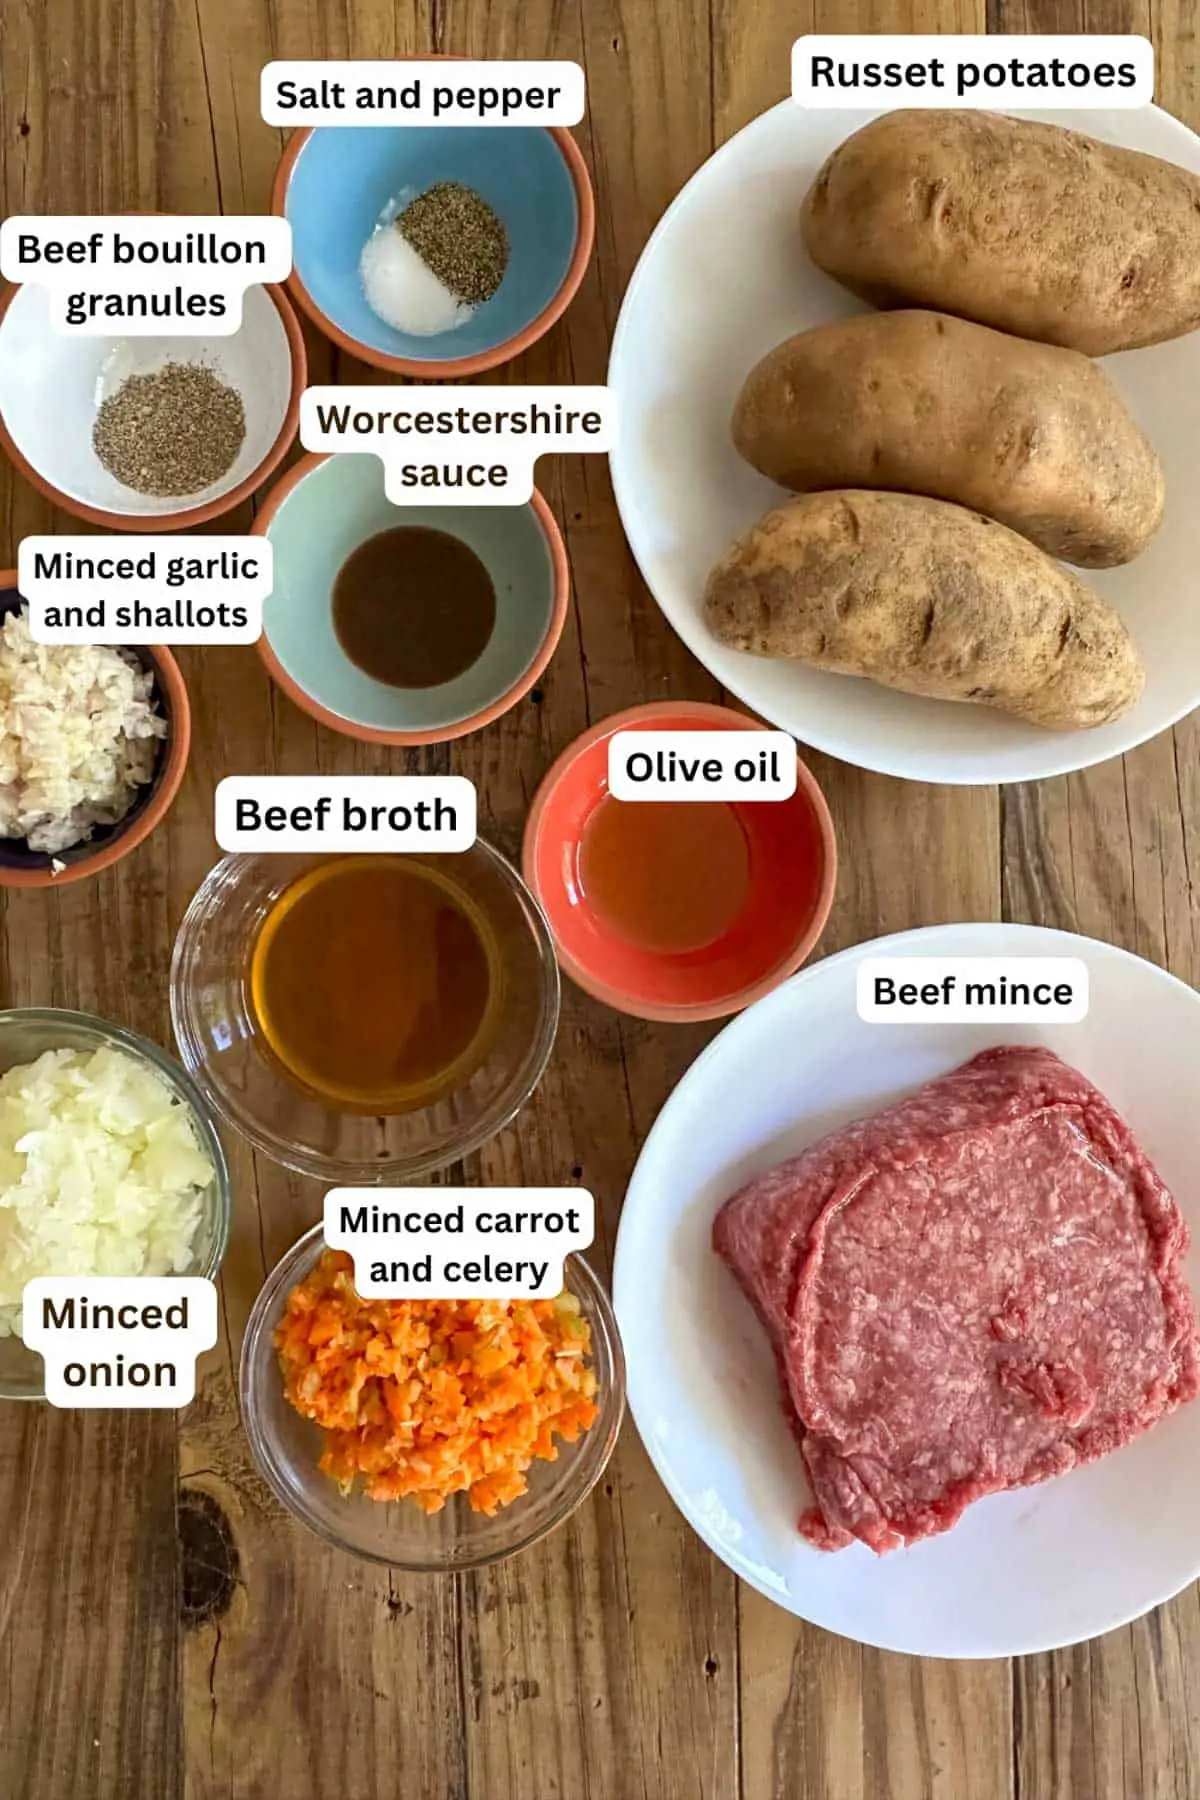 Bowls containing Russet potatoes, beef mince, olive oil, minced carrot and celery, minced onion, beef broth, minced garlic and shallots, Worcestershire sauce, beef bouillon, and salt and pepper.